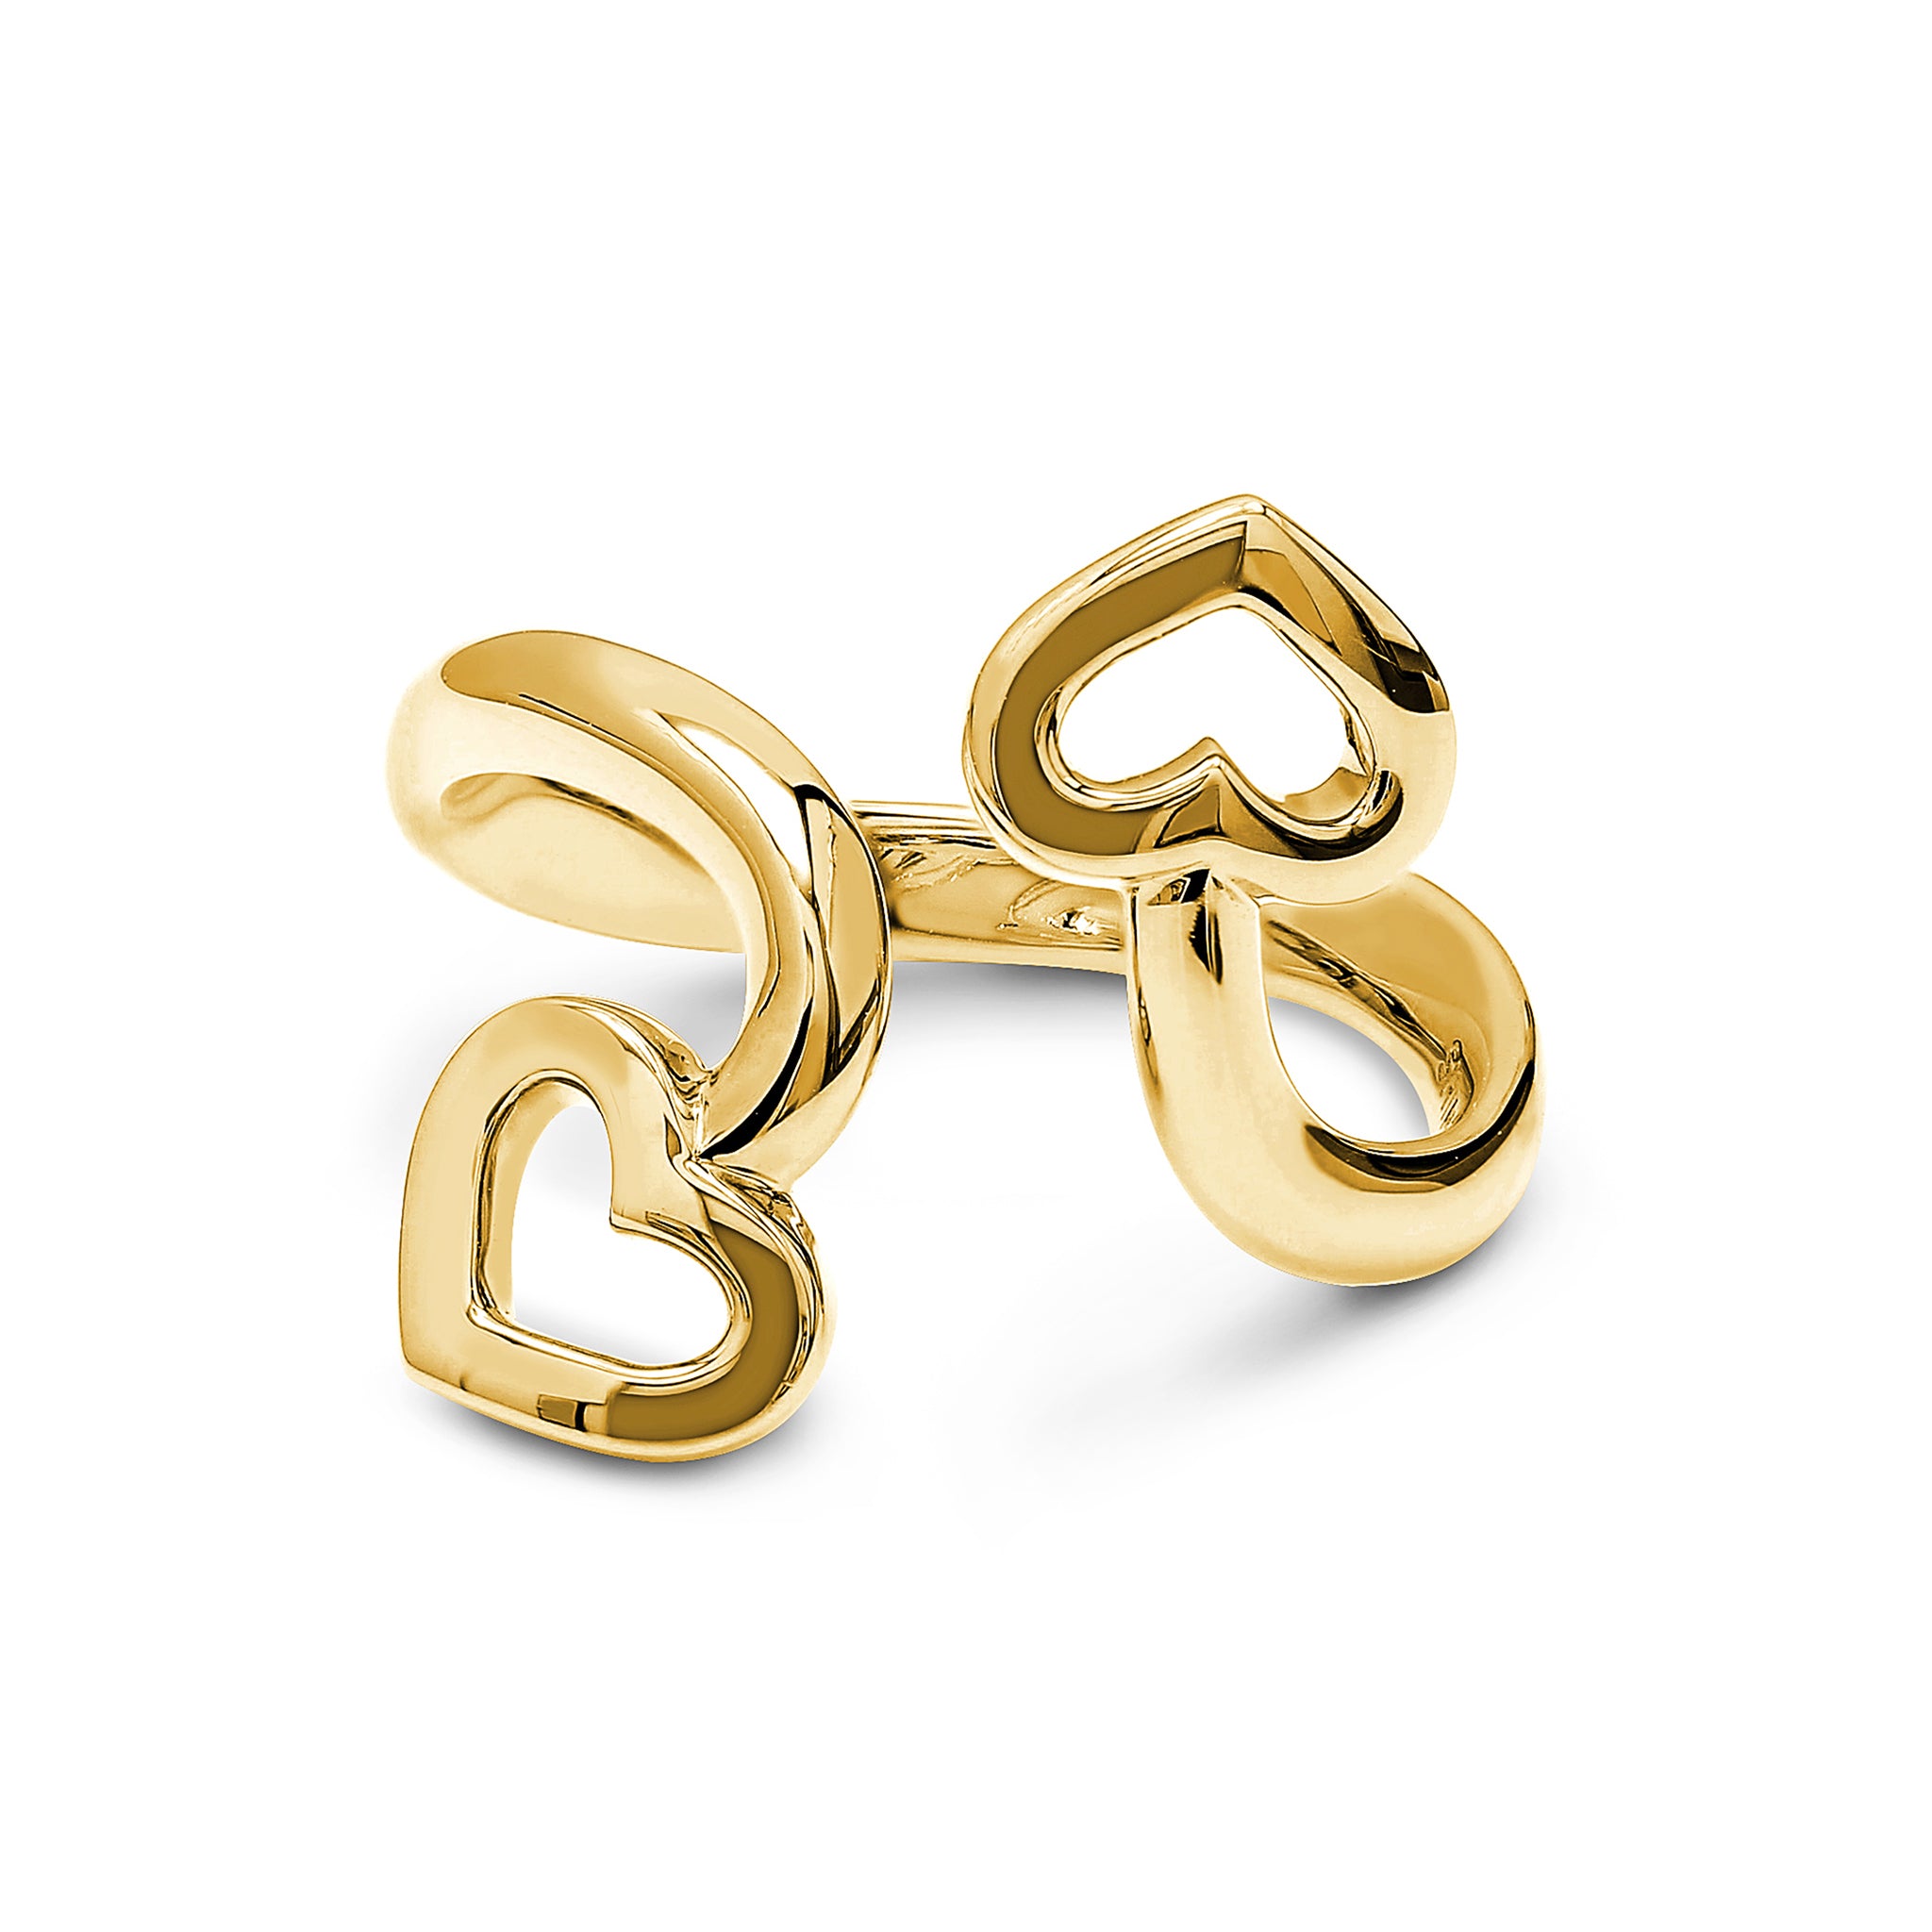 Shimansky - Two Hearts Twist Ring Crafted in 18K Yellow Gold